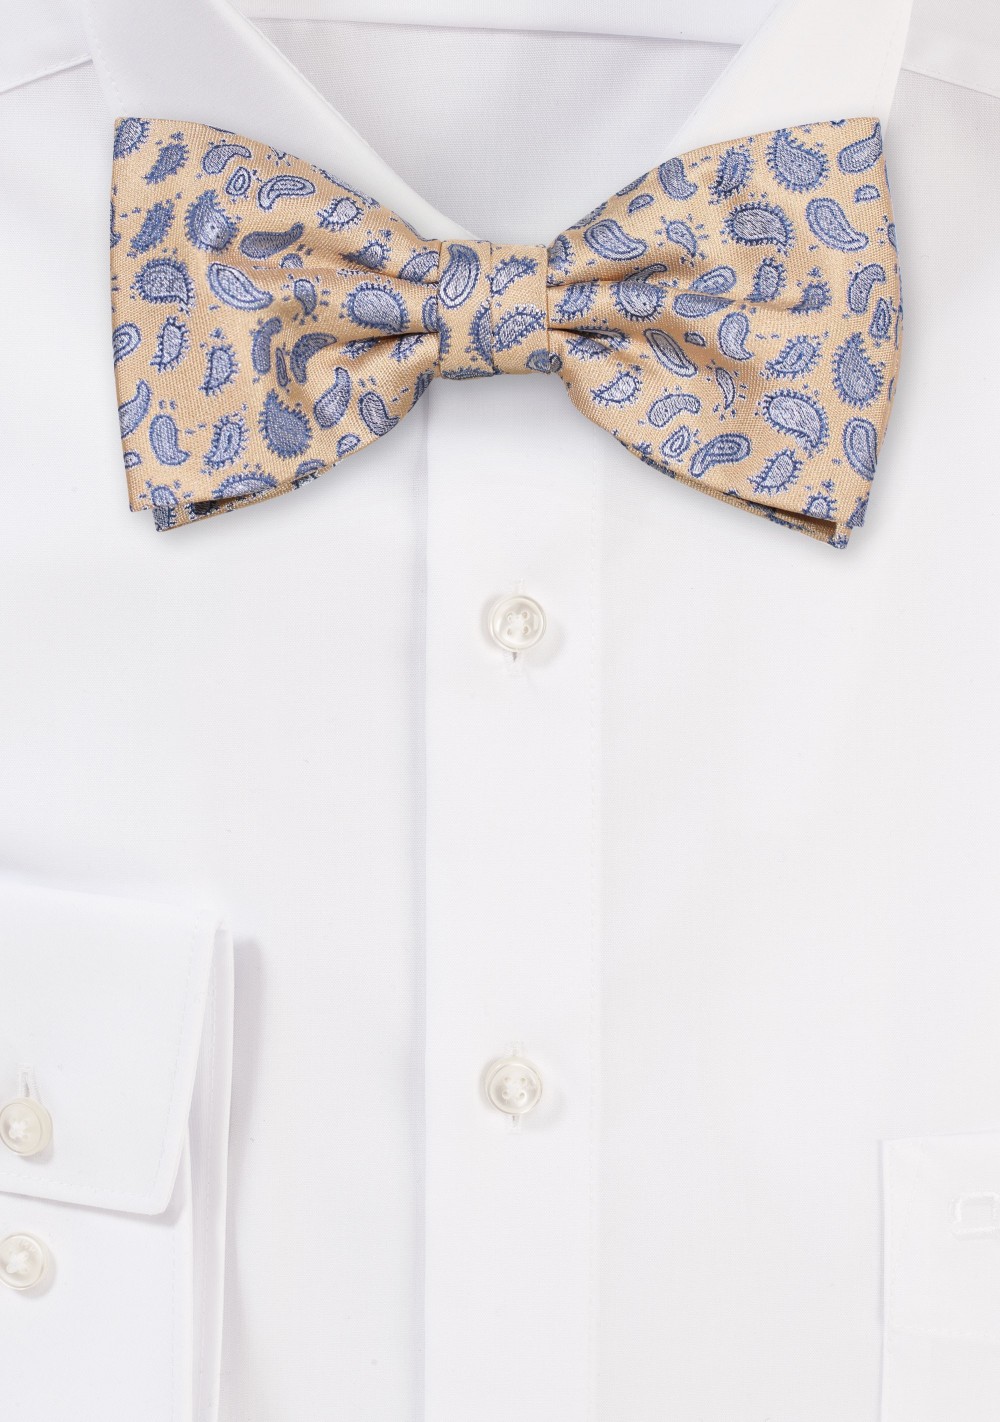 Yellow Bow Tie with Silver Woven Paisleys